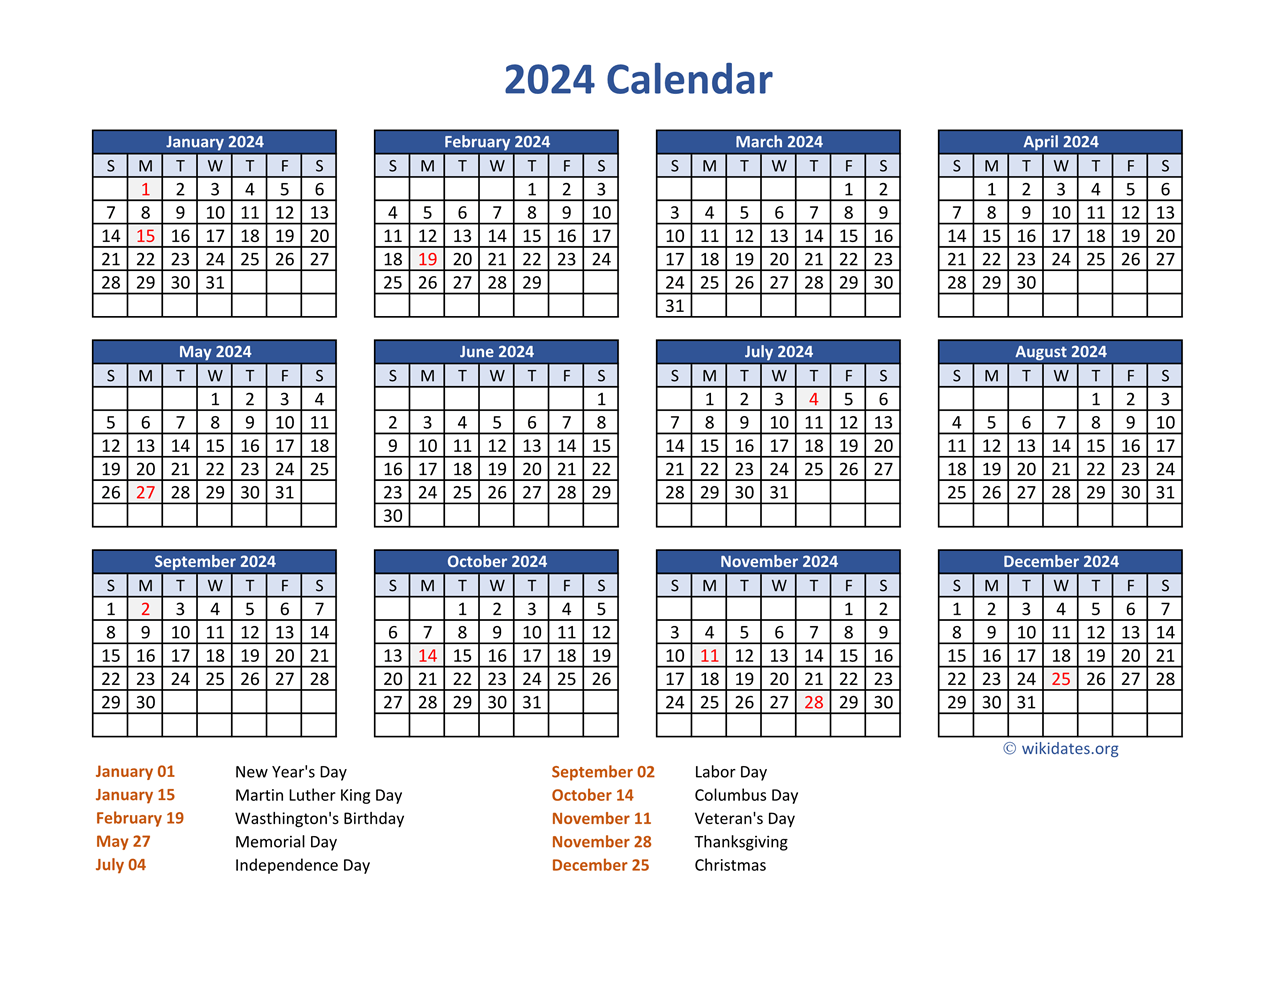 Pdf Calendar 2024 With Federal Holidays | Wikidates for March 2024 Calendar Printable Wiki